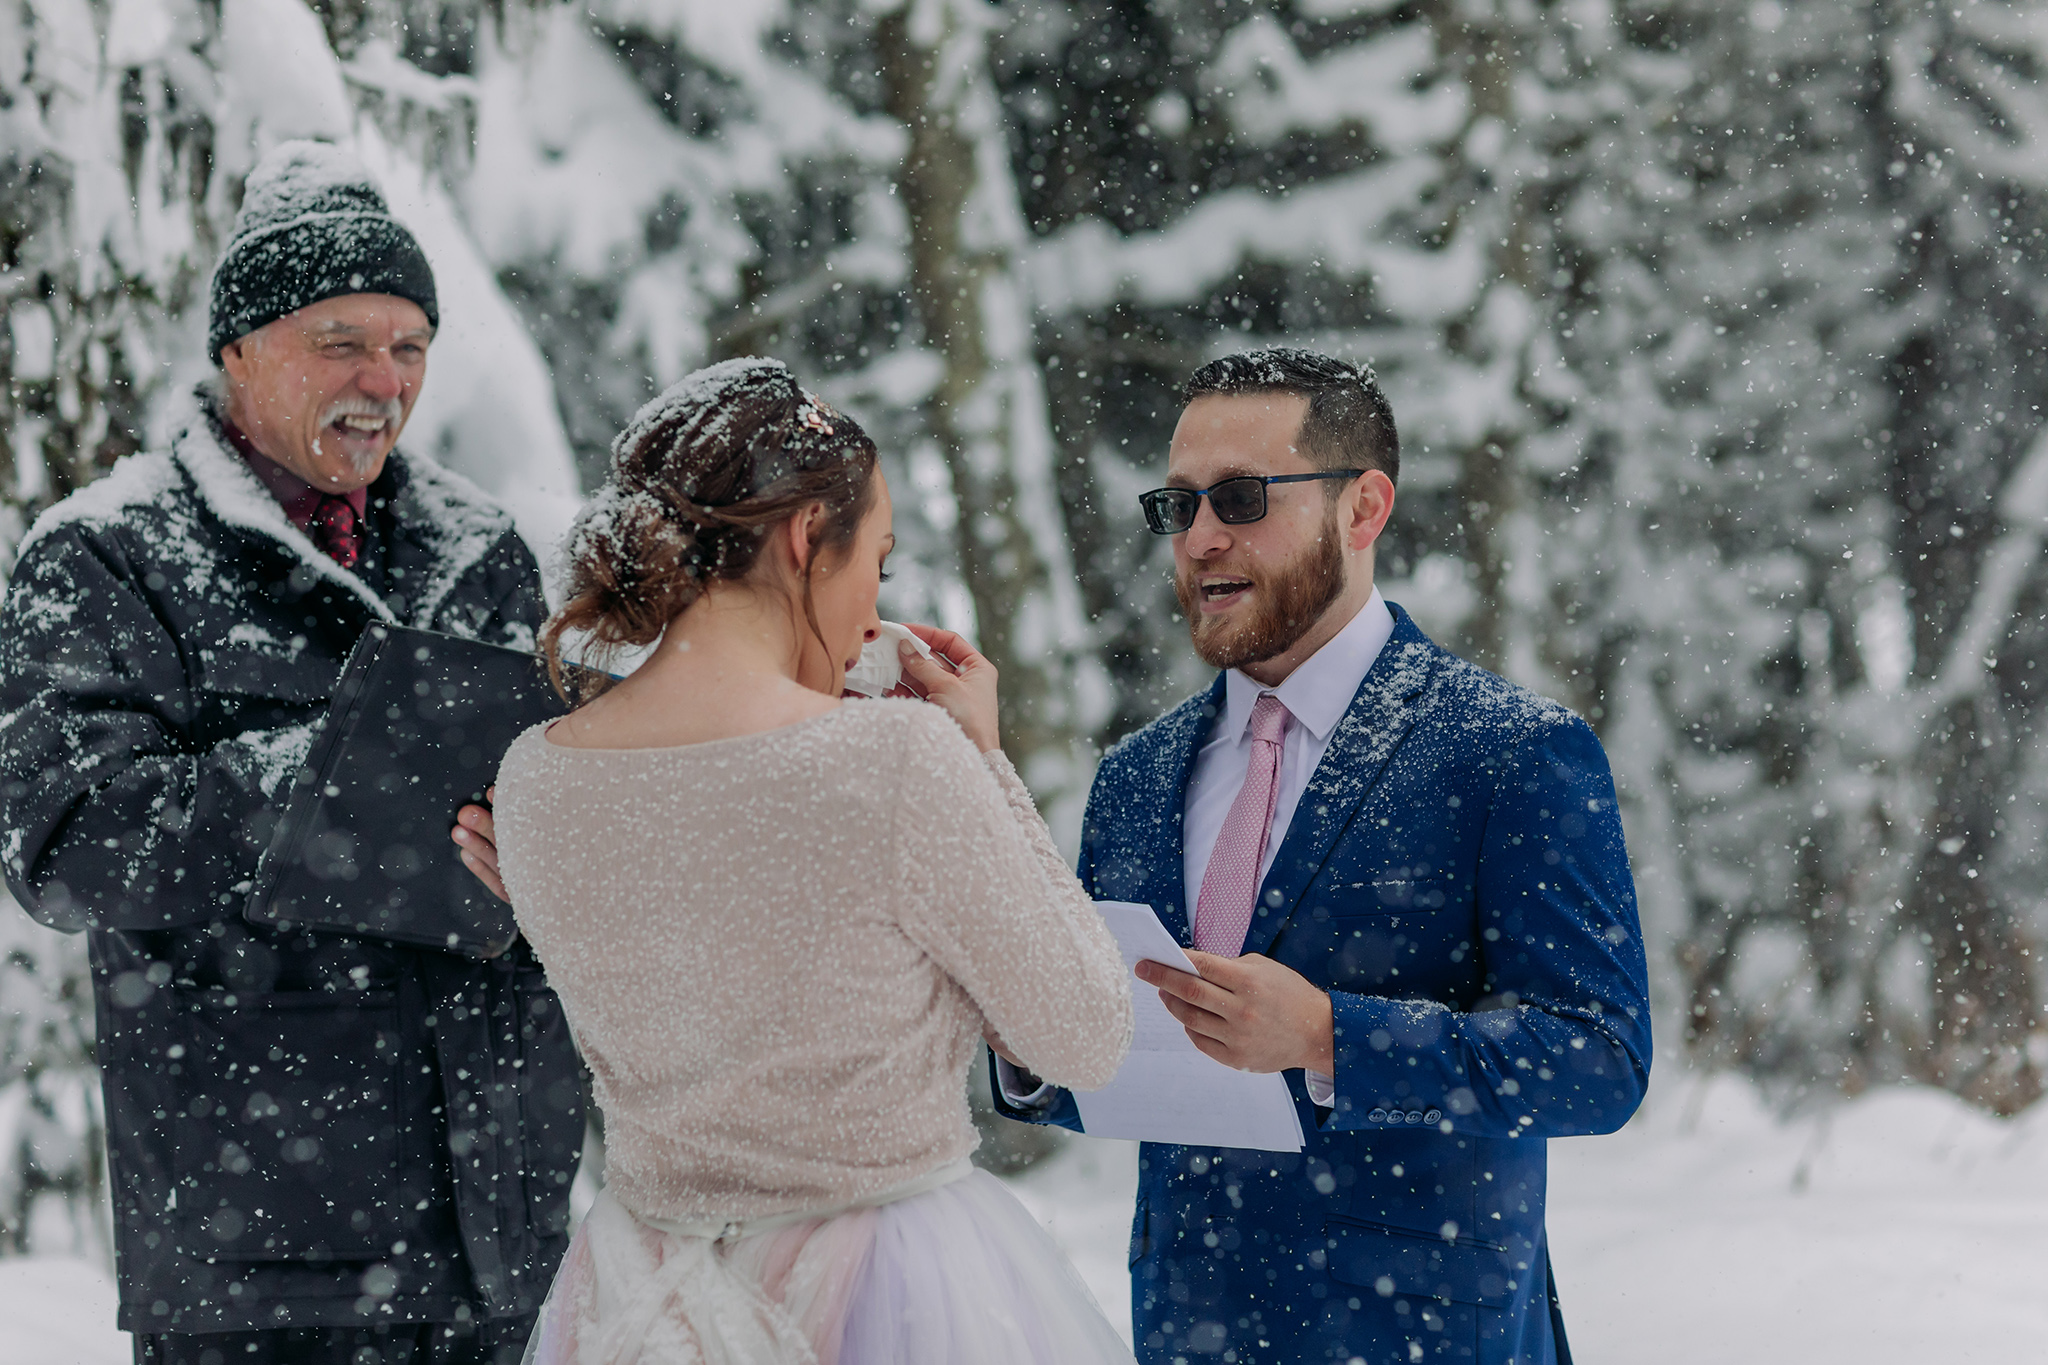 Elope in Lake Louise with a magical snowy outdoor winter wonderland forest wedding ceremony